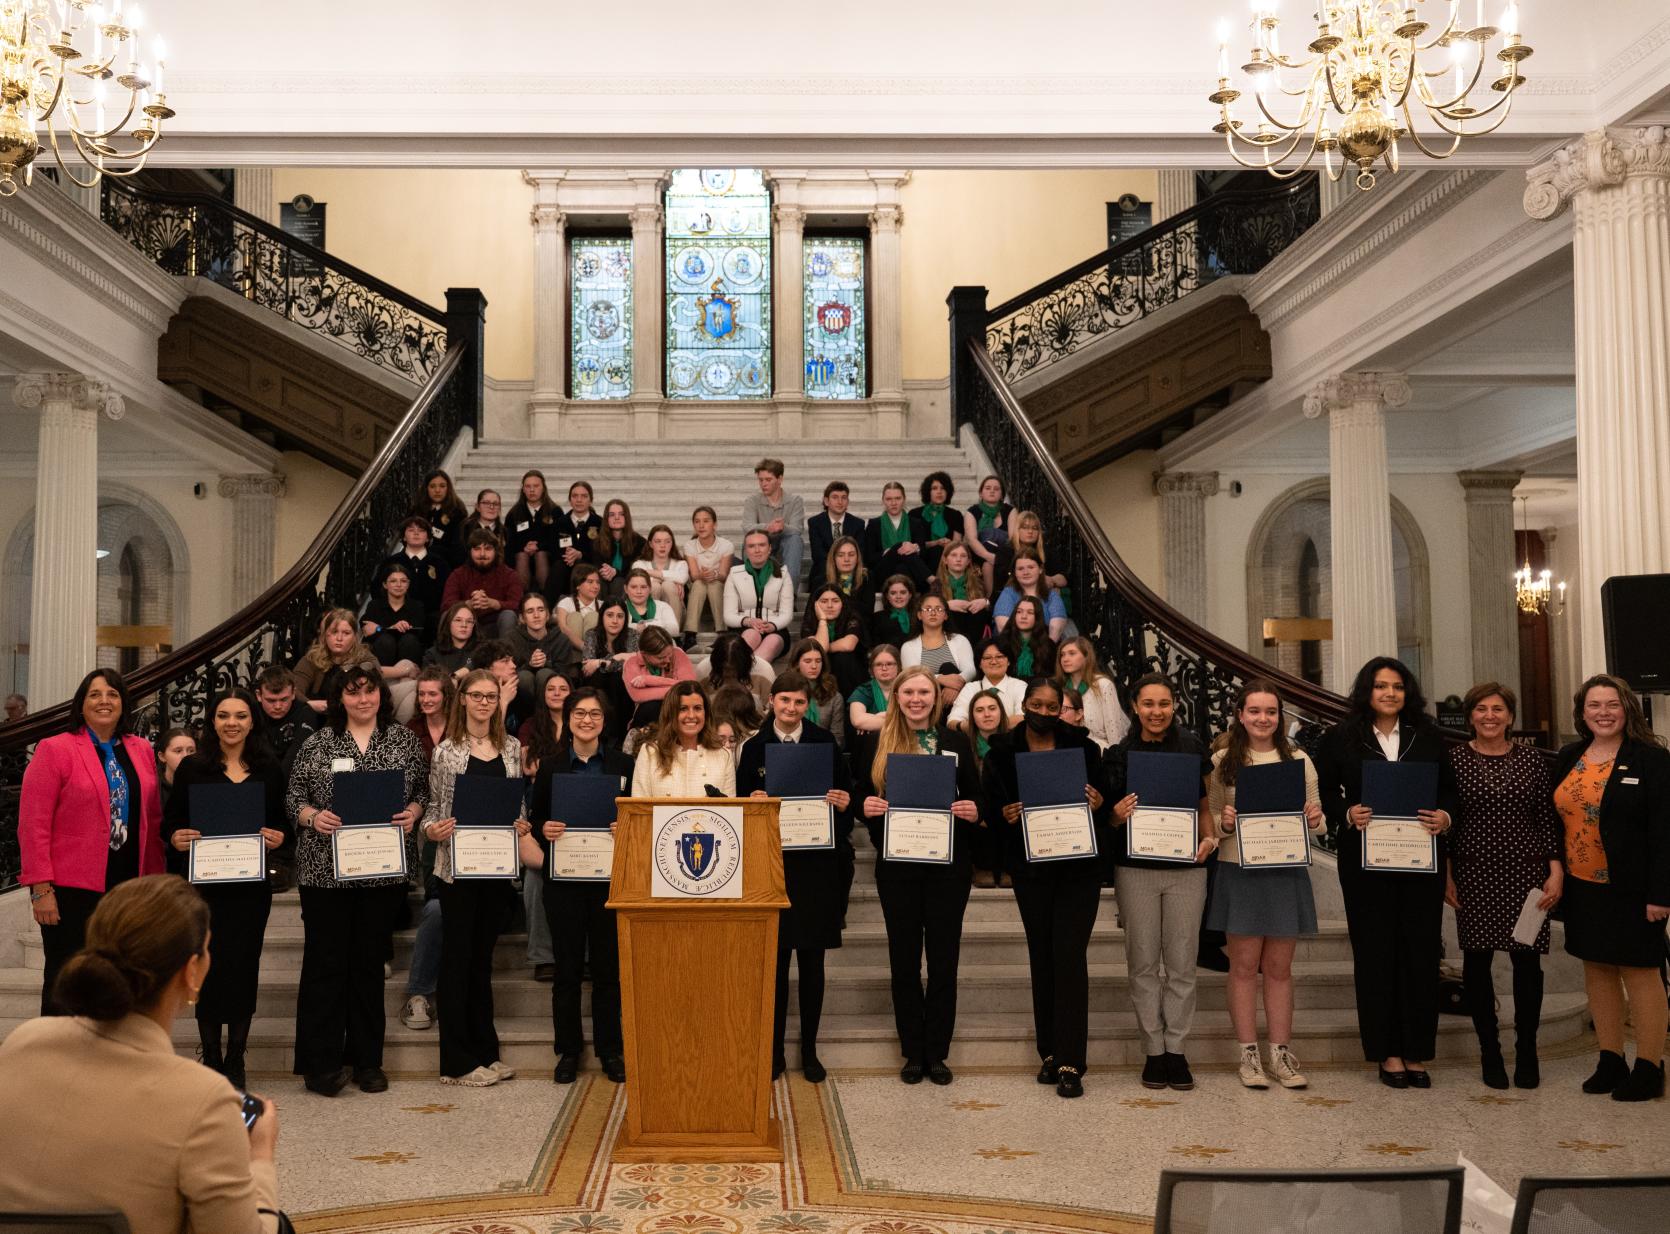 Lt. Governor Kim Driscoll joined by EEA Secretary Rebecca Tepper, MDAR Commissioner Ashley Randle and inaugural members of the Agricultural Youth Council during Ag Day at the State House